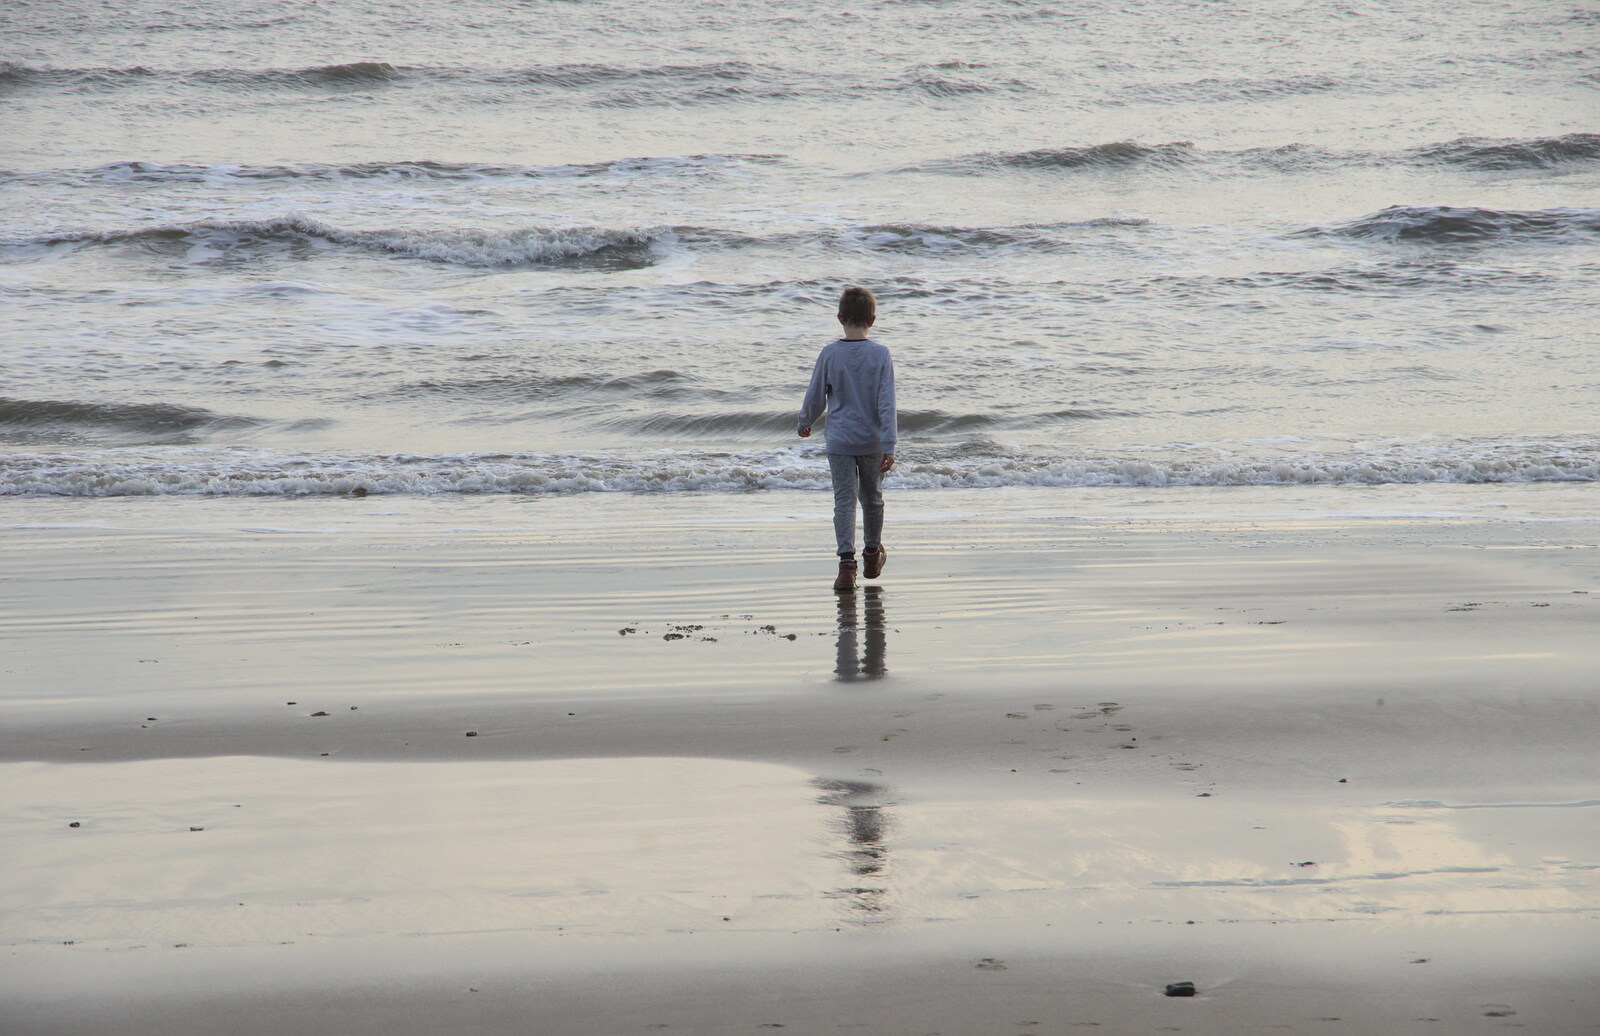 Fred walks around on the shore from Thanksgiving in Highcliffe, Dorset - 23rd November 2018